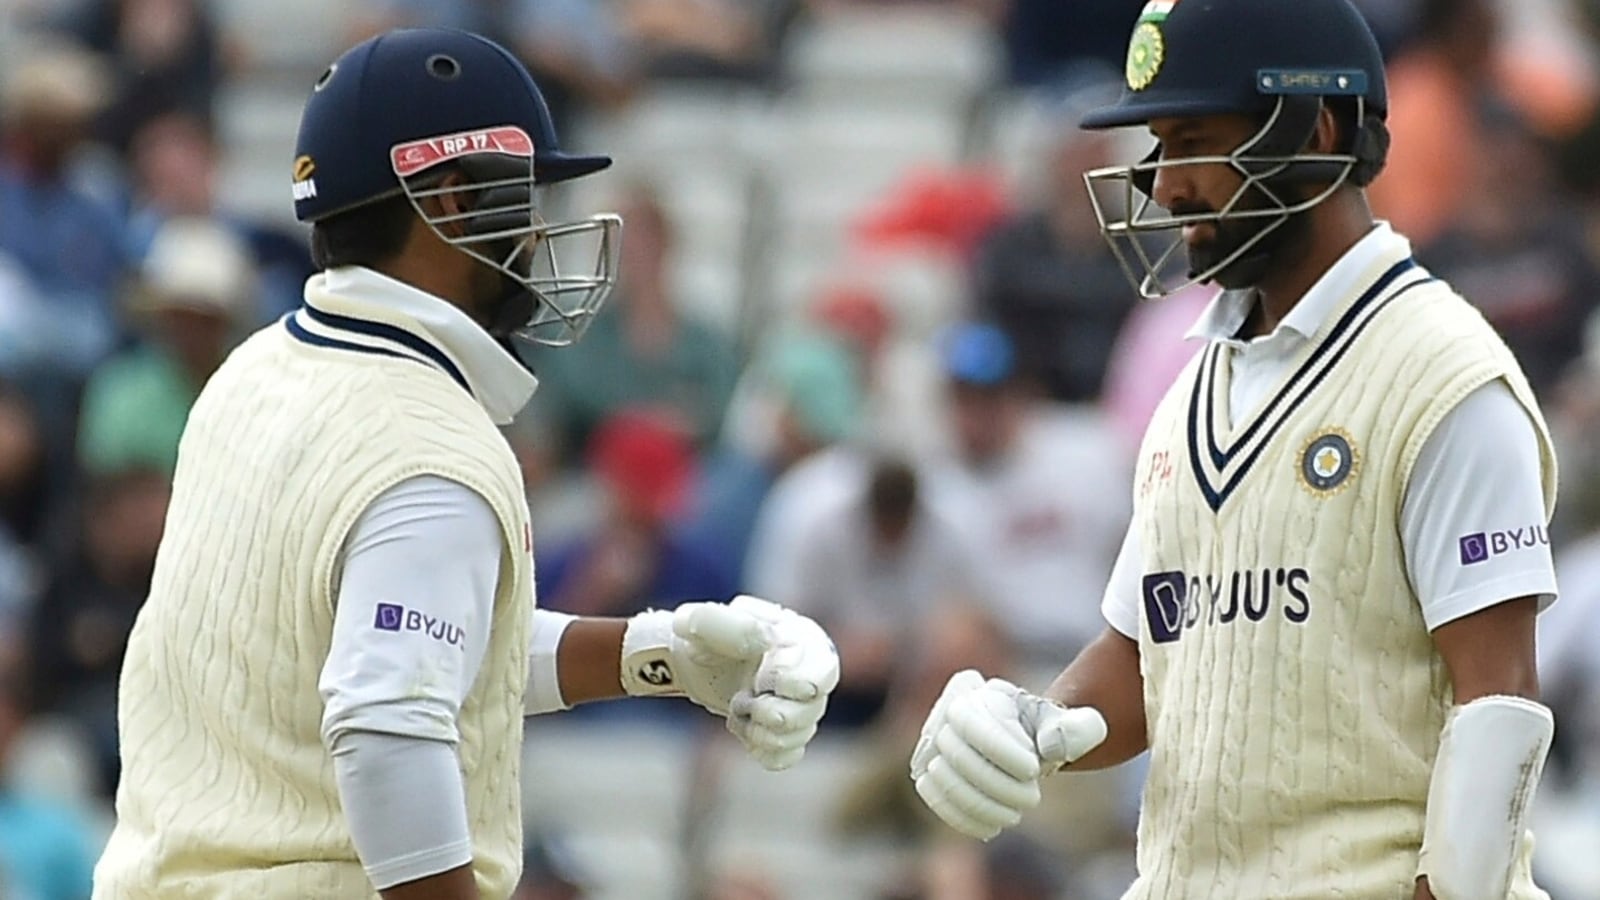 India vs England Highlights, 5th Test Day 3 Pujara hits fifty, Pant in control; IND lead by 257 runs at stumps Hindustan Times